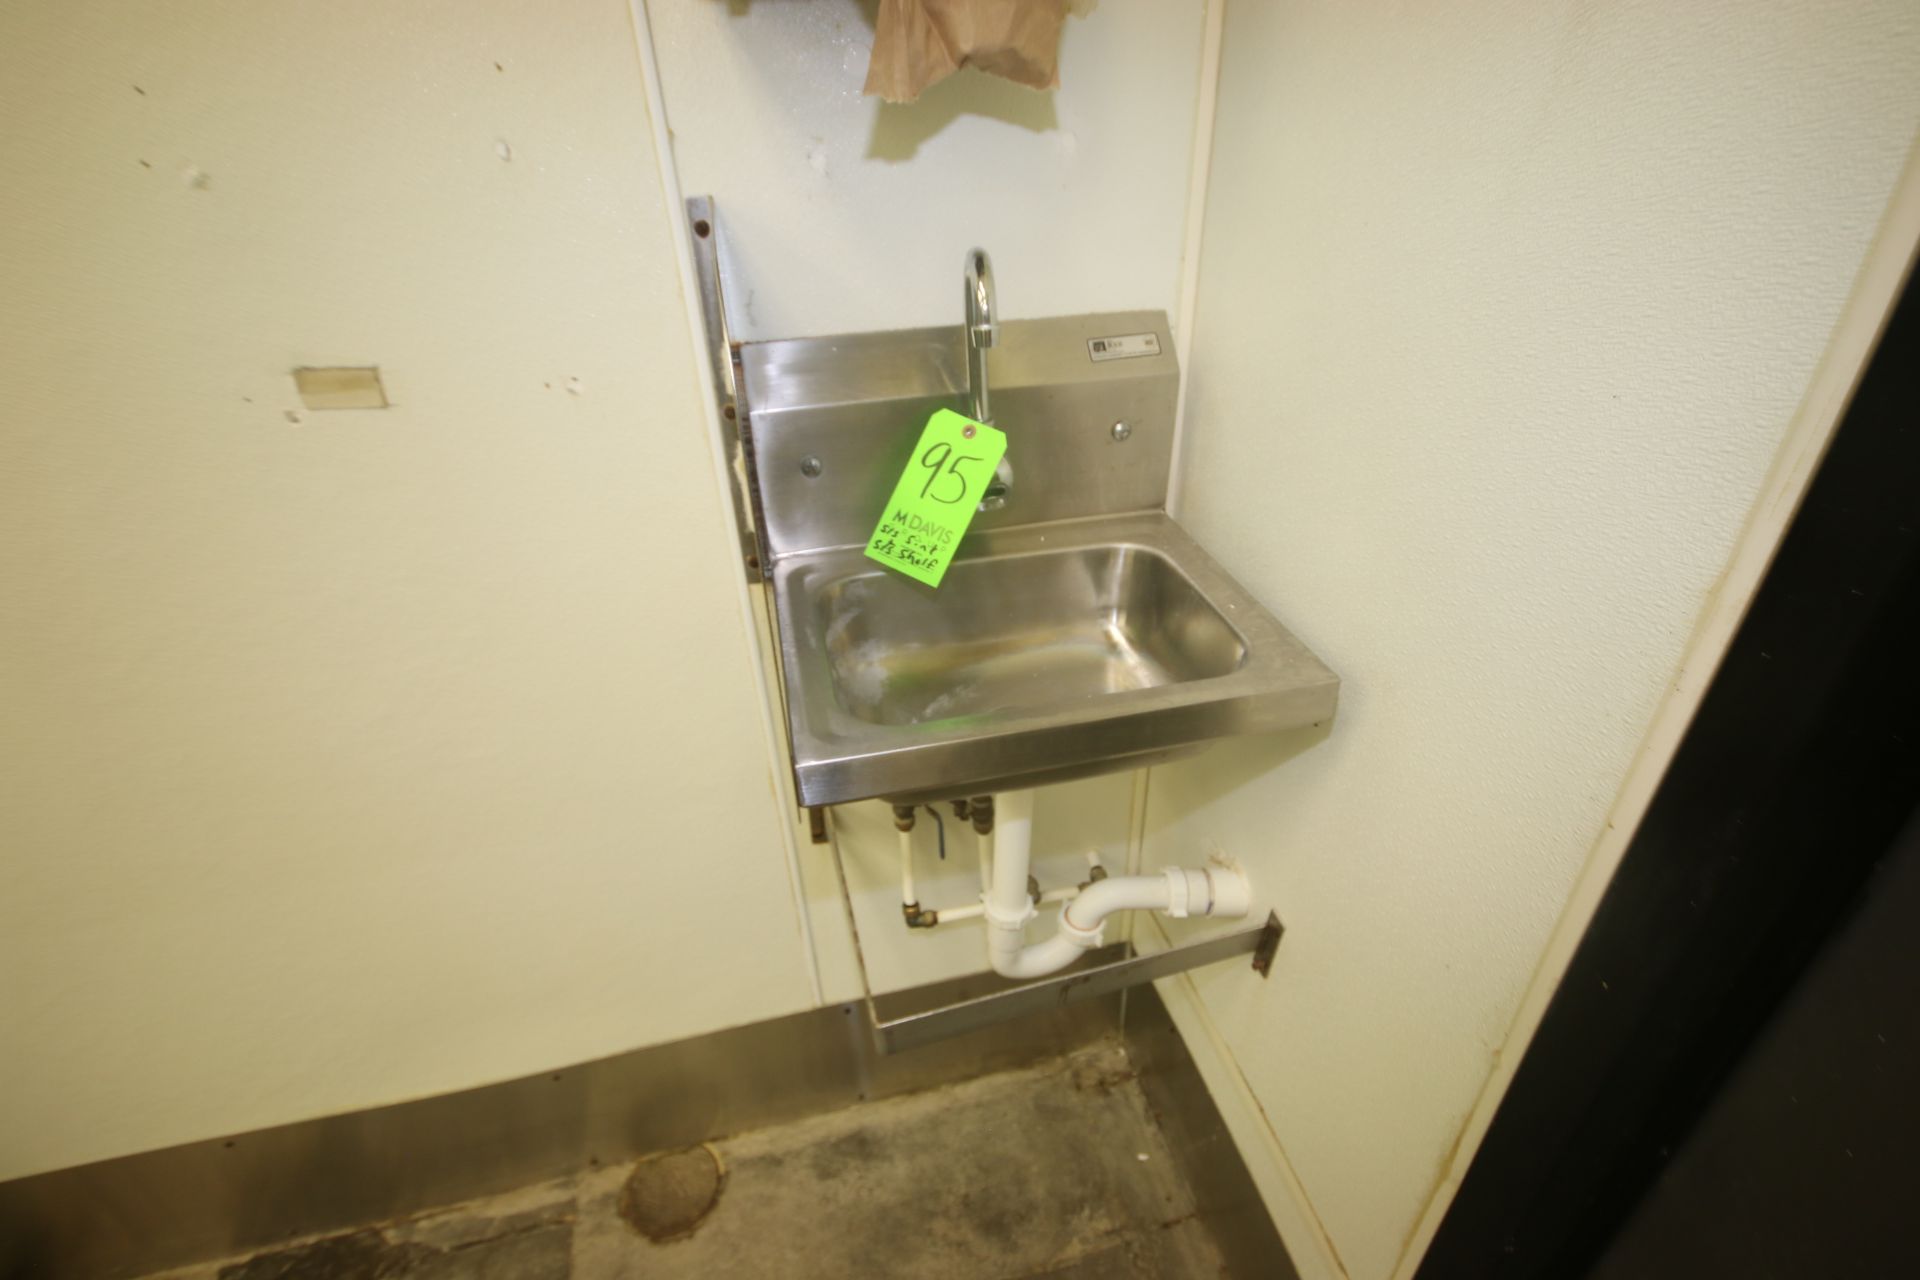 S/S Single Bowl Sink, Wall Mounted, with Motion Detection Spicket, with Wall Mounted S/S Shelving